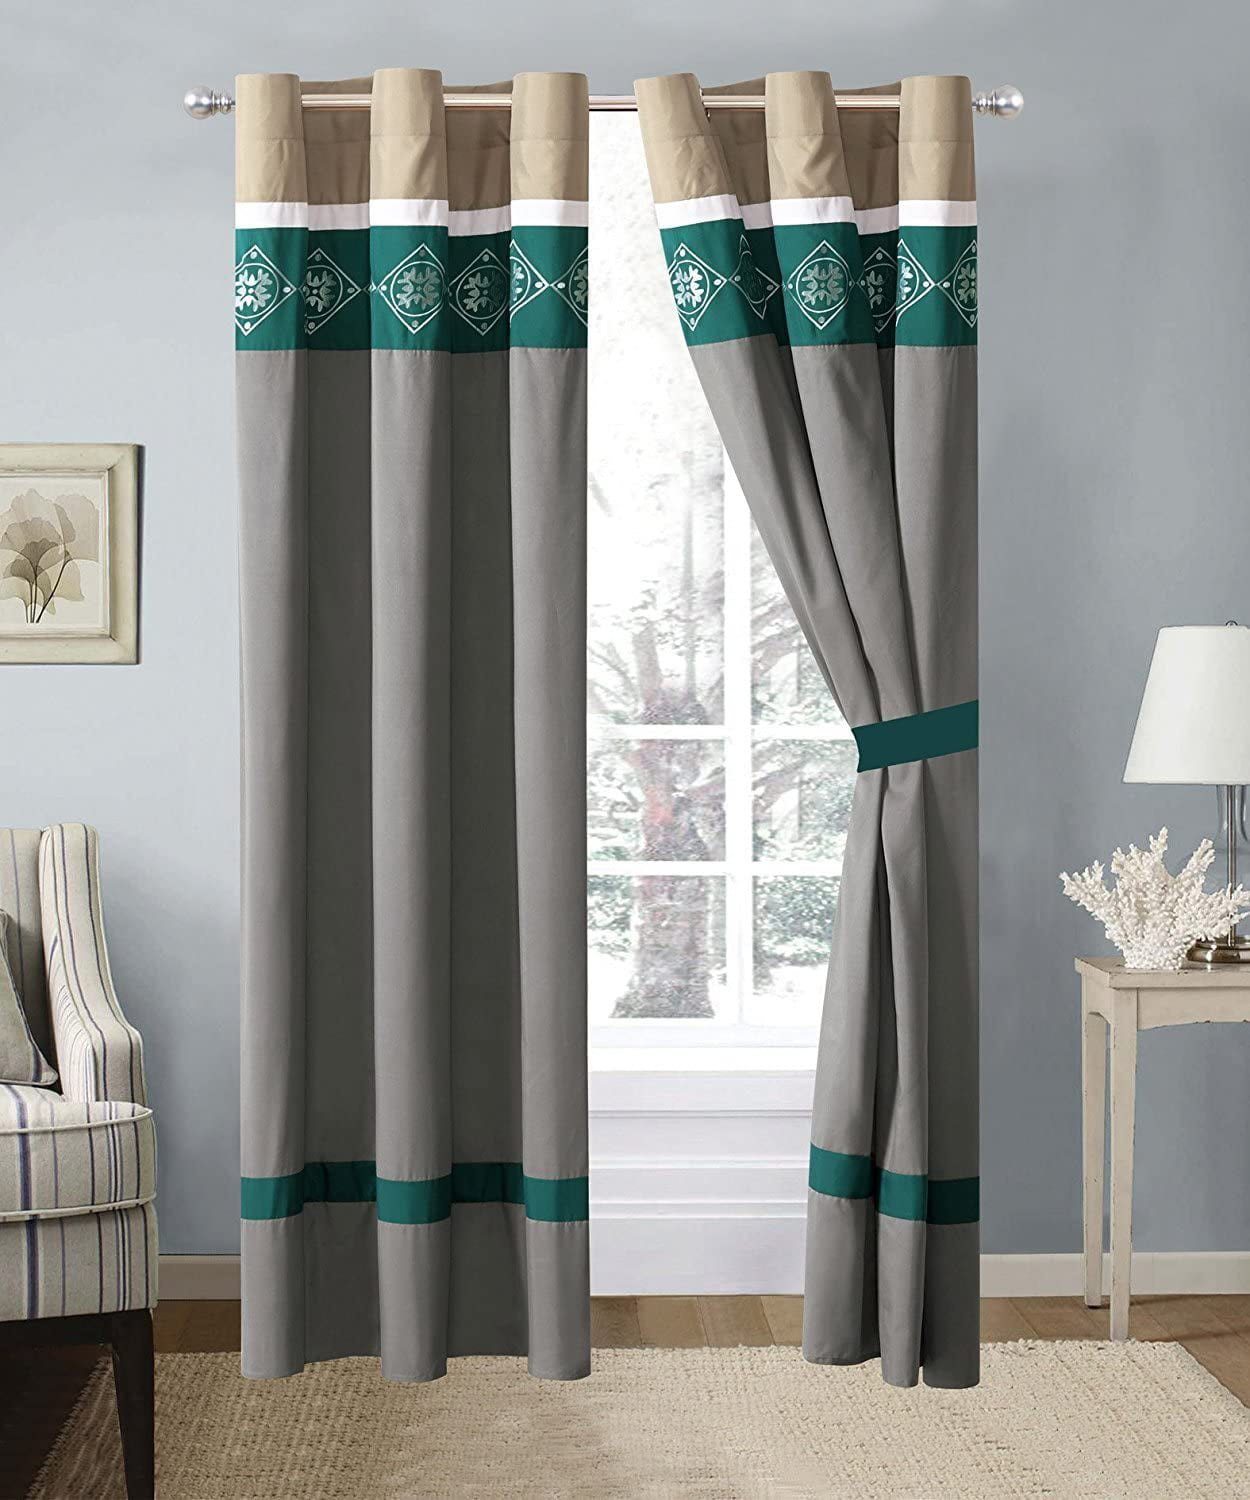 HGMart Bedroom Curtains Blackout Drapery Panels - Microfiber Thermal